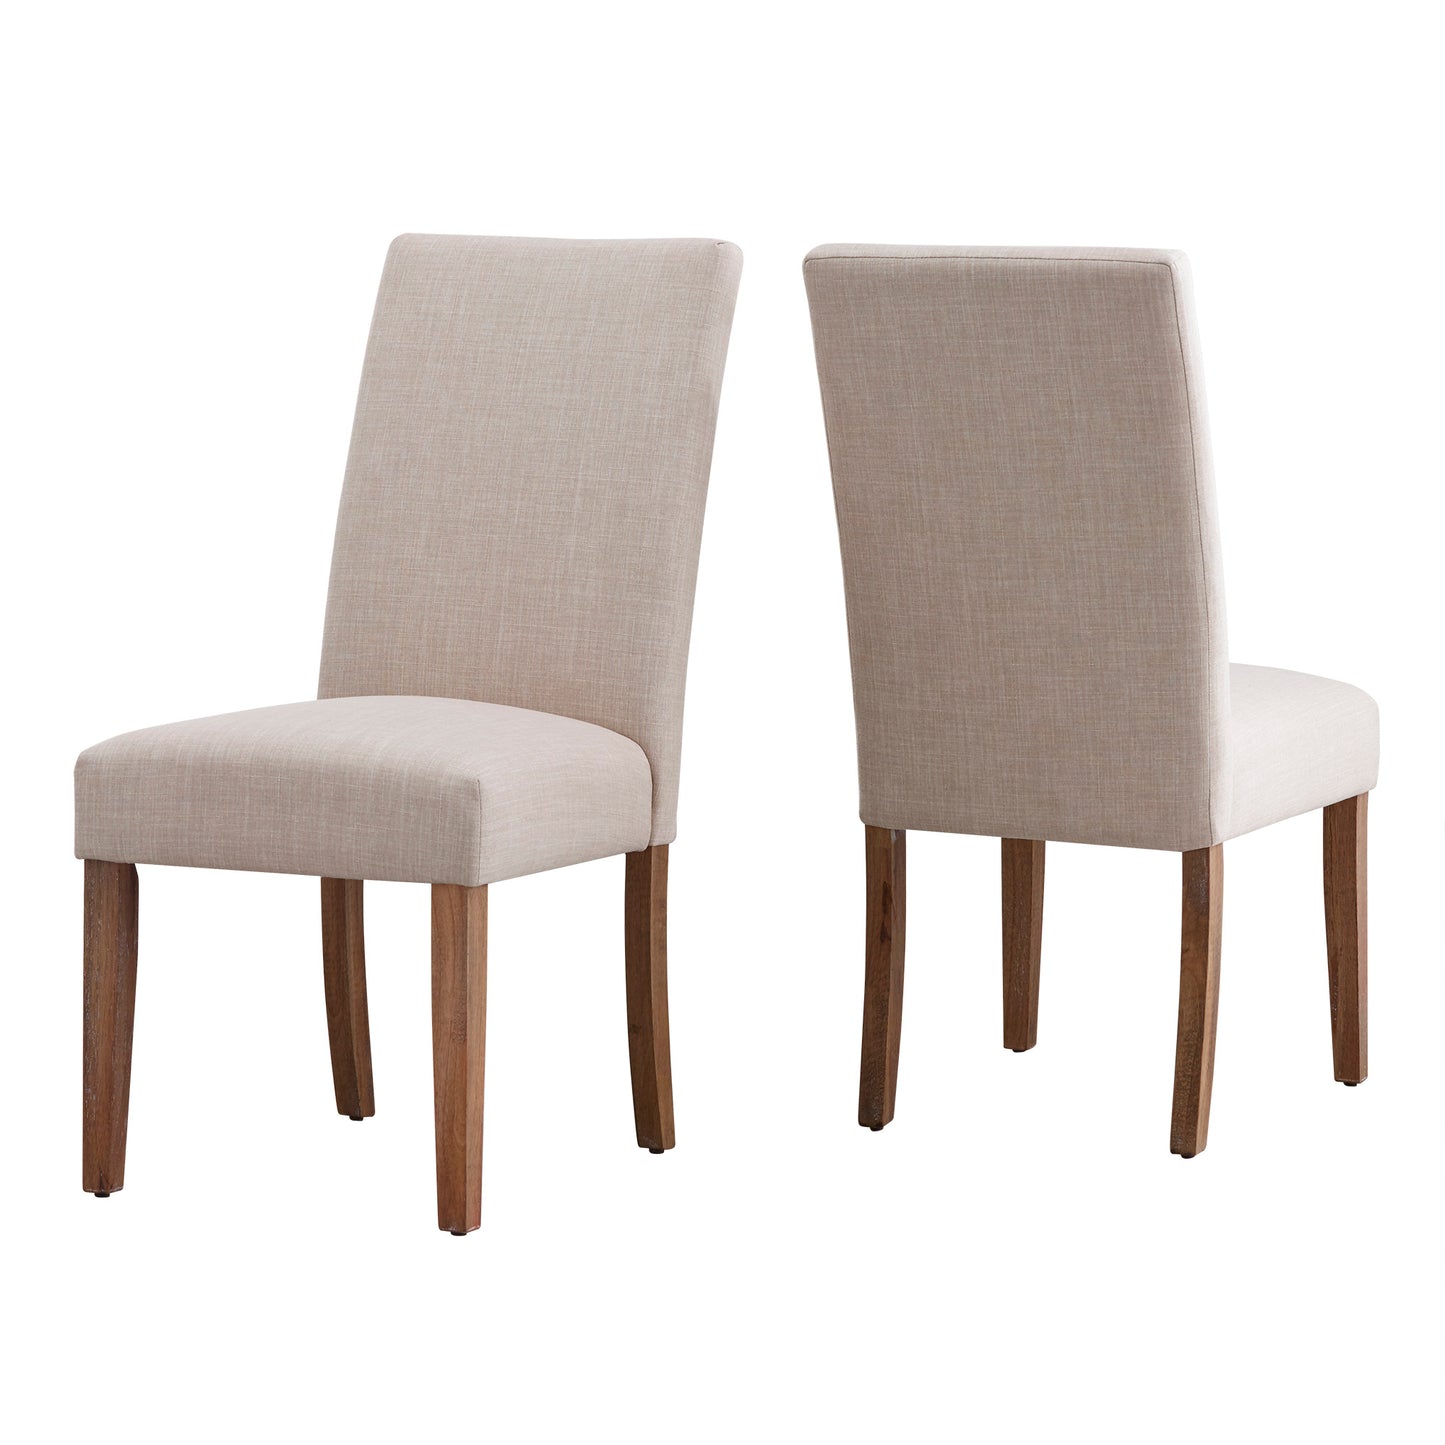 Fabric Upholstered Parsons Dining Chairs (Set of 2) - Beige Linen, No Slipcover